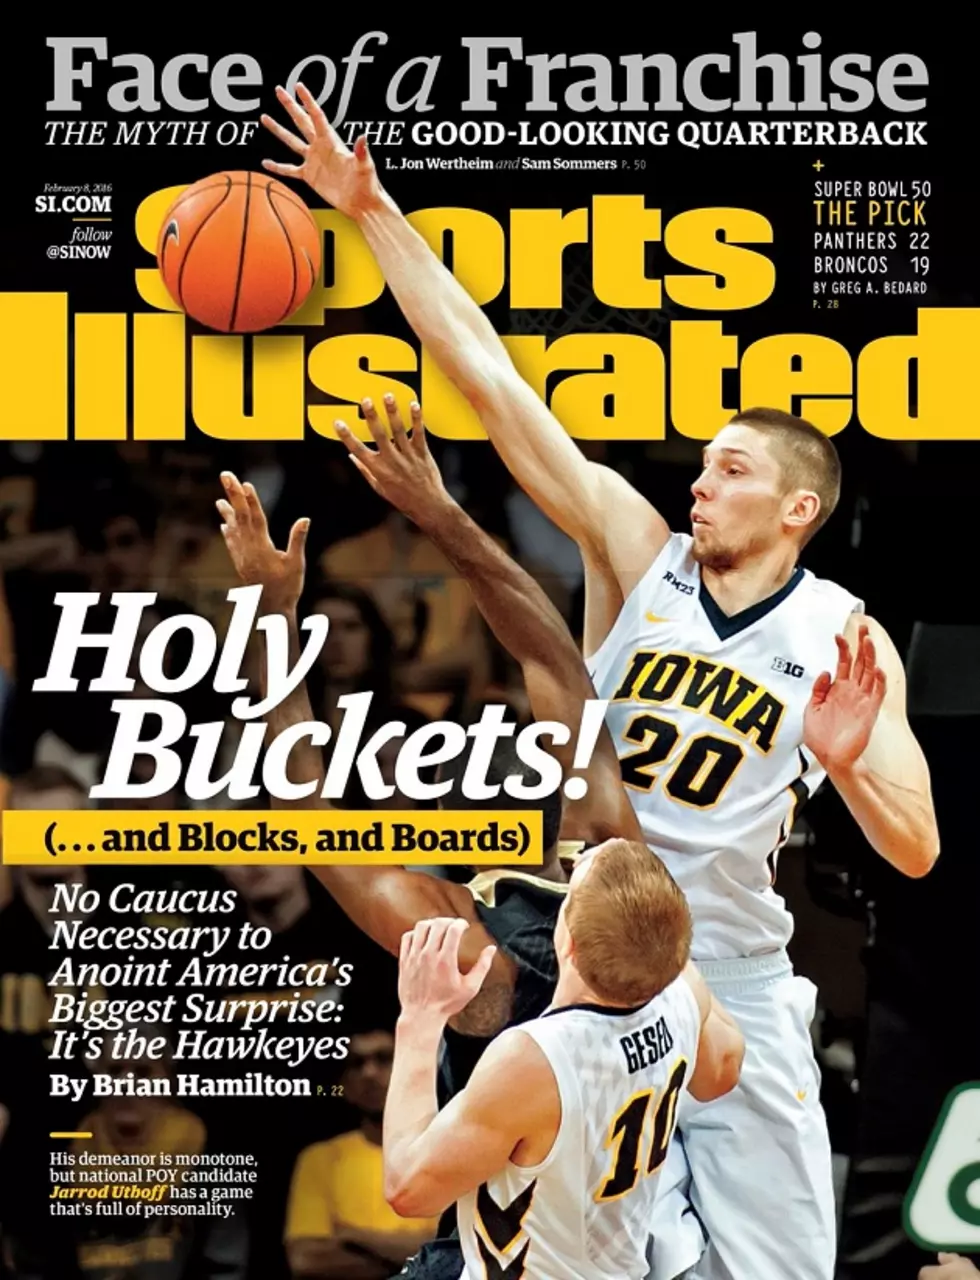 Hawkeye Hoopster Lands Cover of Sports Illustrated [PHOTO]